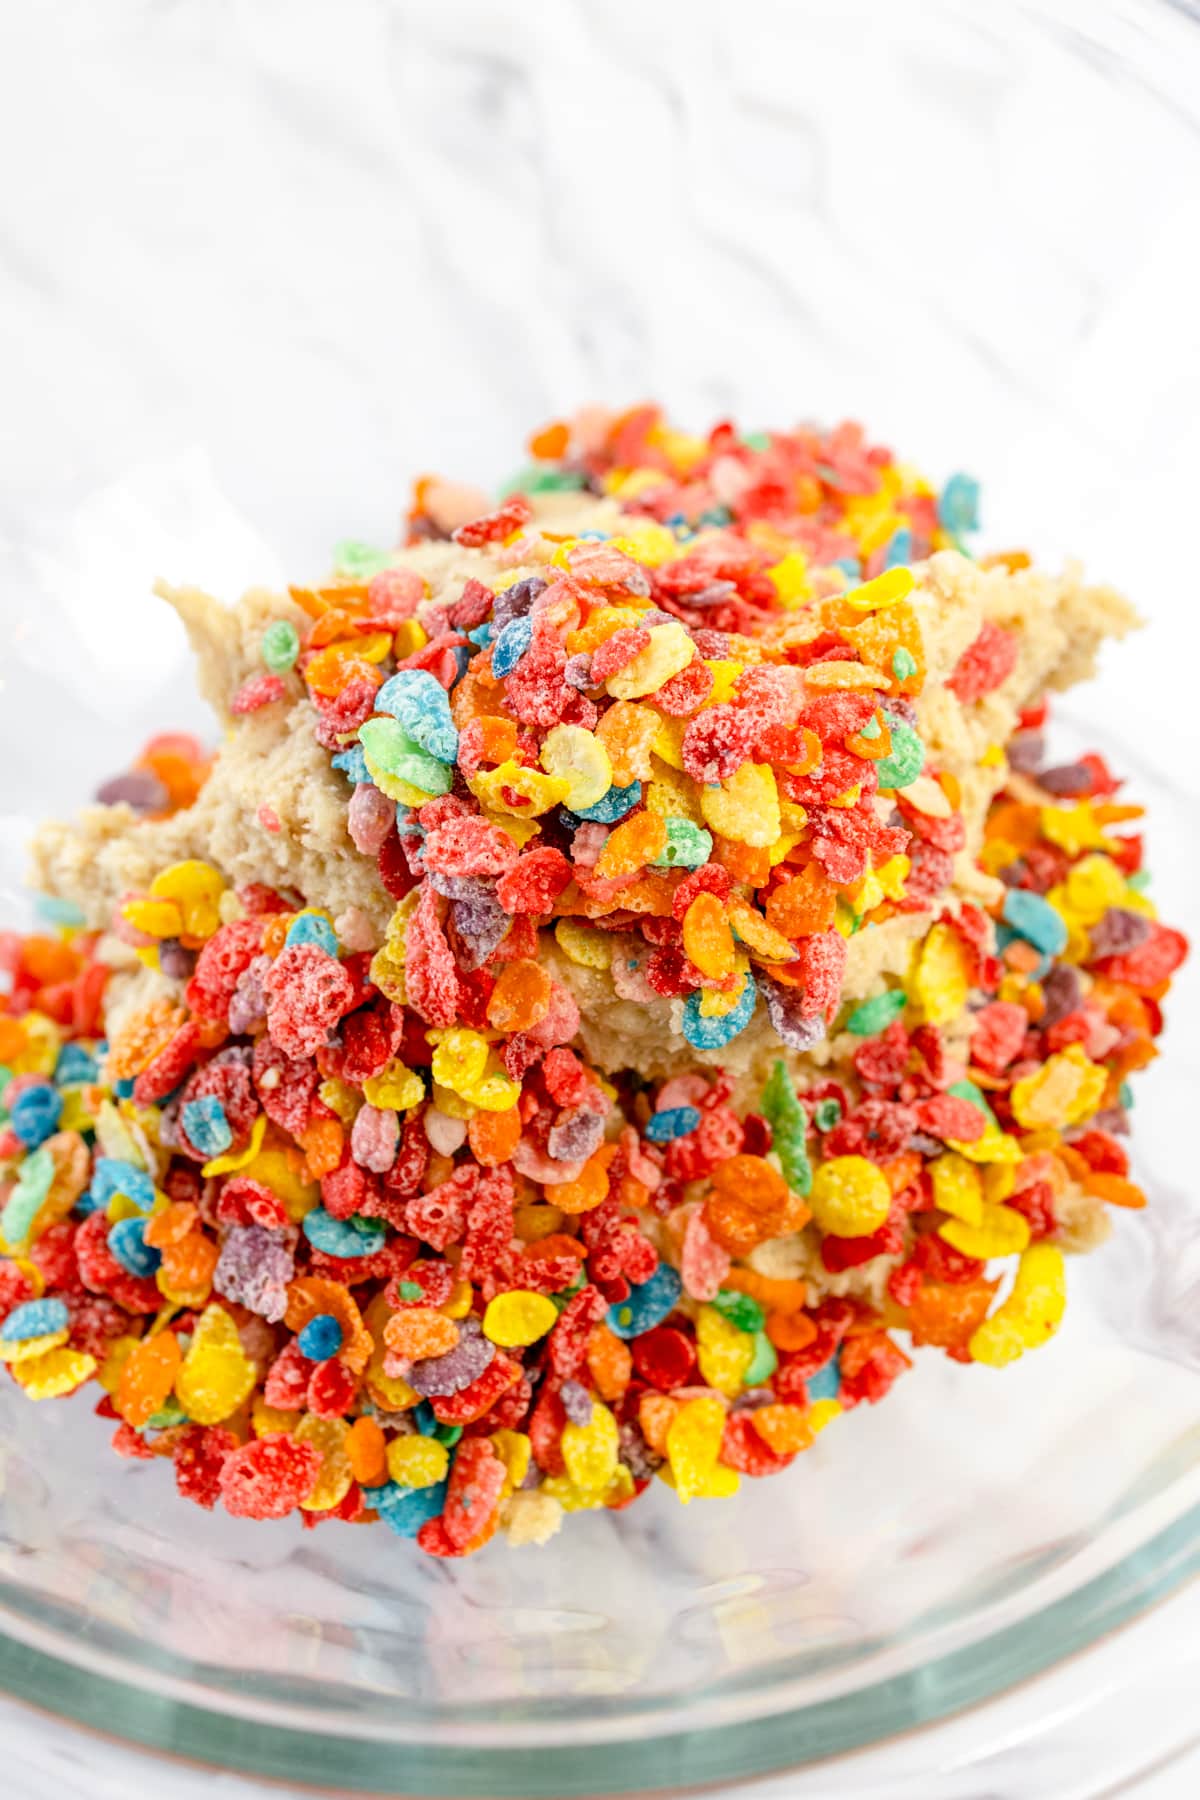 Top view of a glass mixing bowl with plain cookie dough in the bottom and fruity pebble cereal on top.